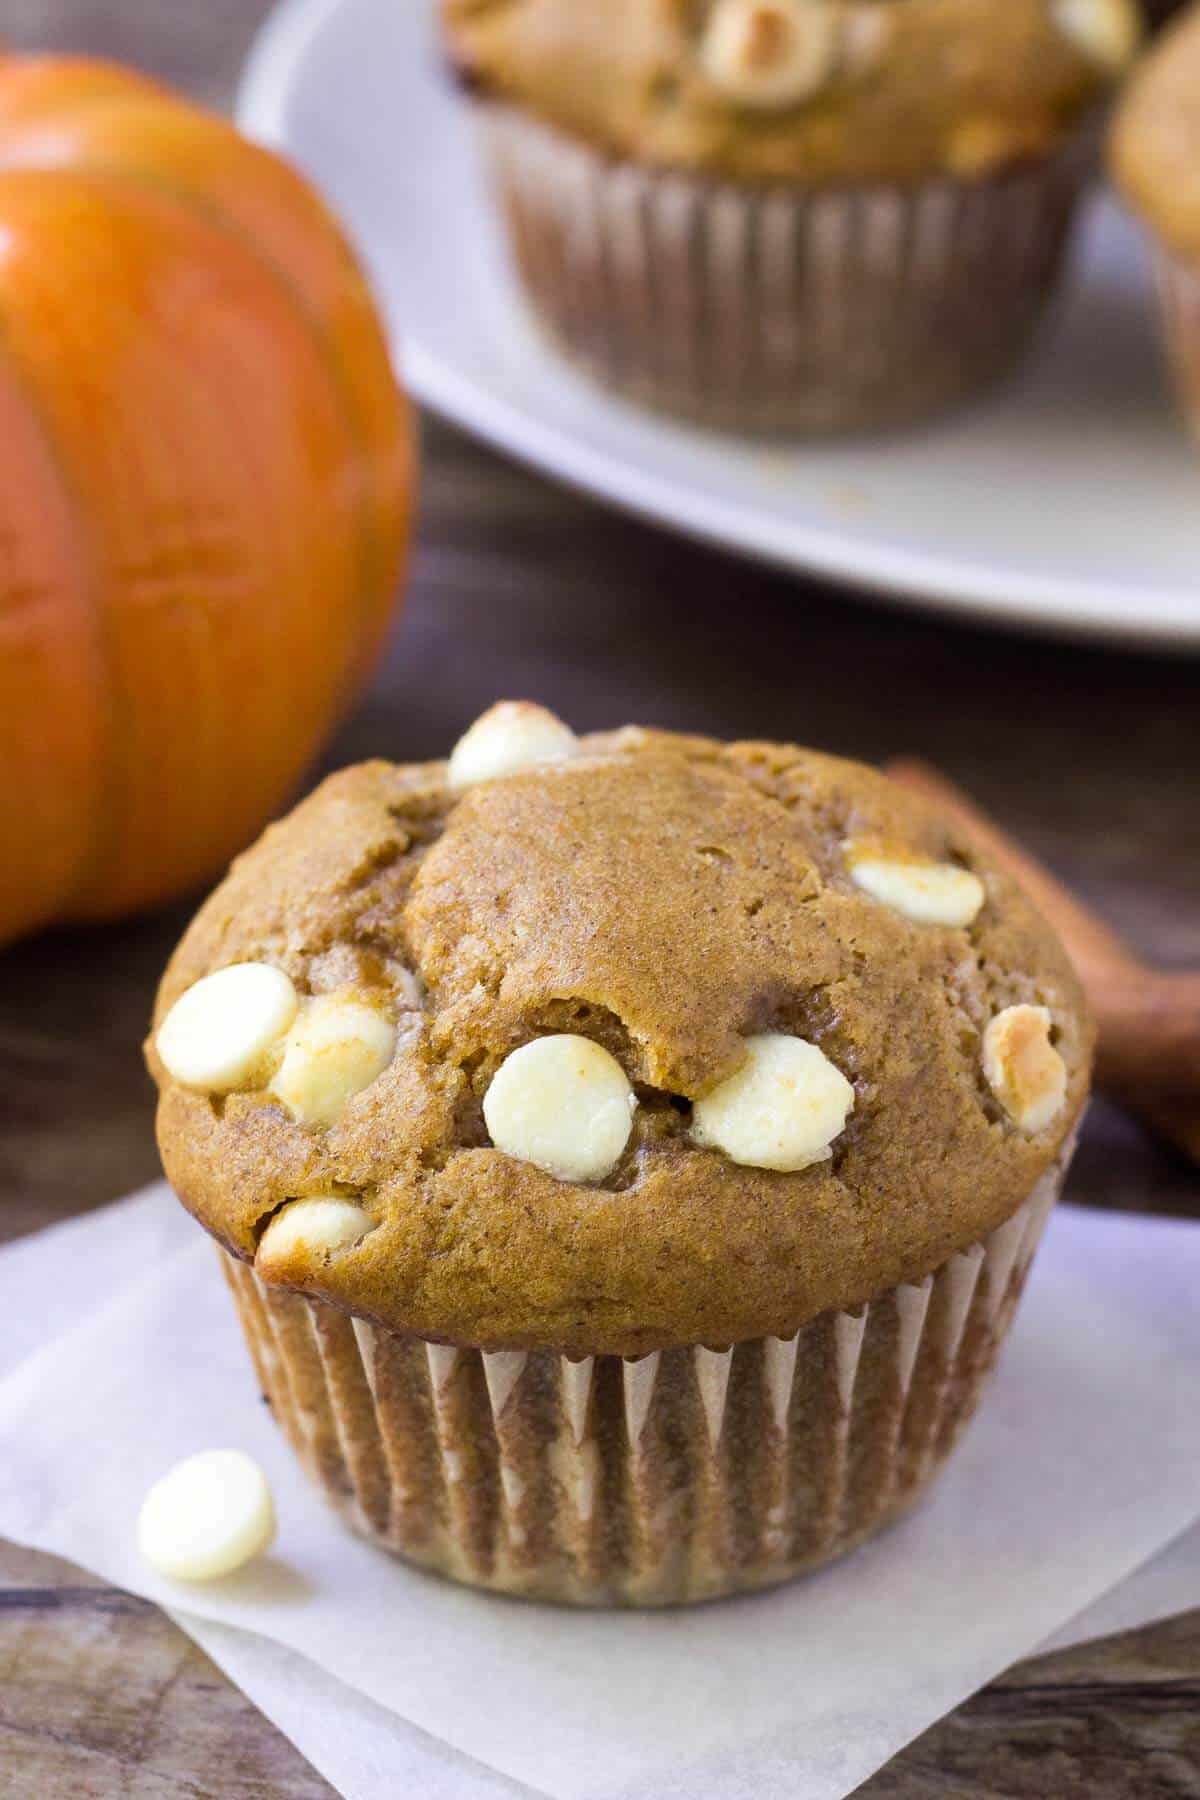 These pumpkin white chocolate chip muffins are fluffy, moist and filled with white chocolate chips. The pumpkin flavor & spices go deliciously with sweet white chocolate for a combo that's completely delicious.